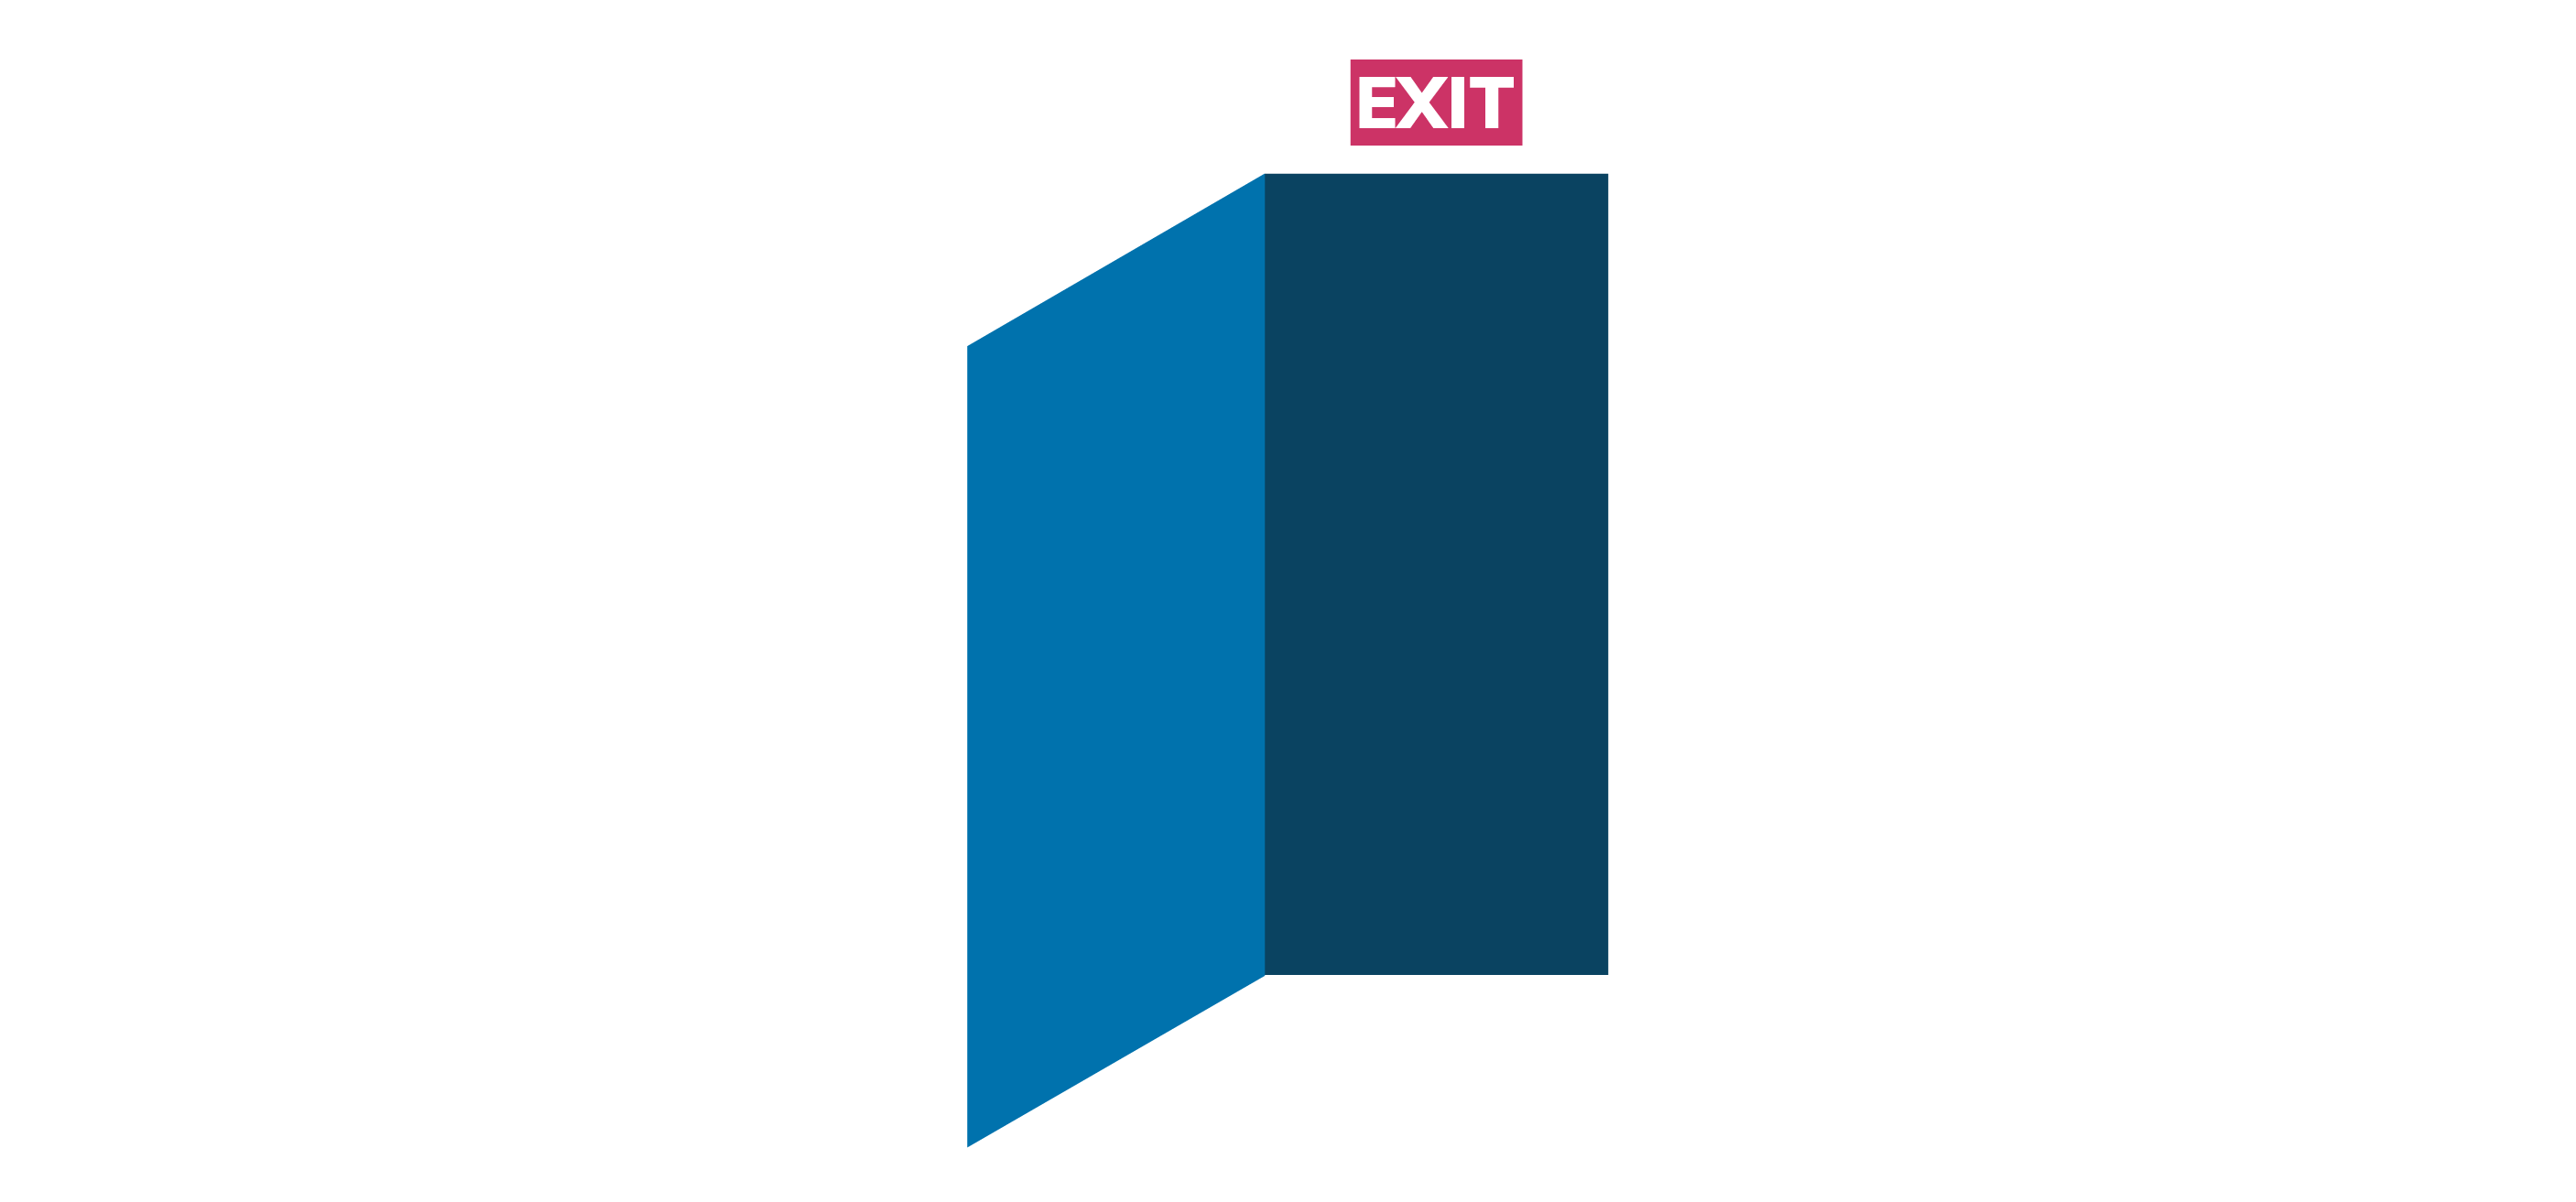 Illustration showing an emergency exit door with a clear demarcated exit sign